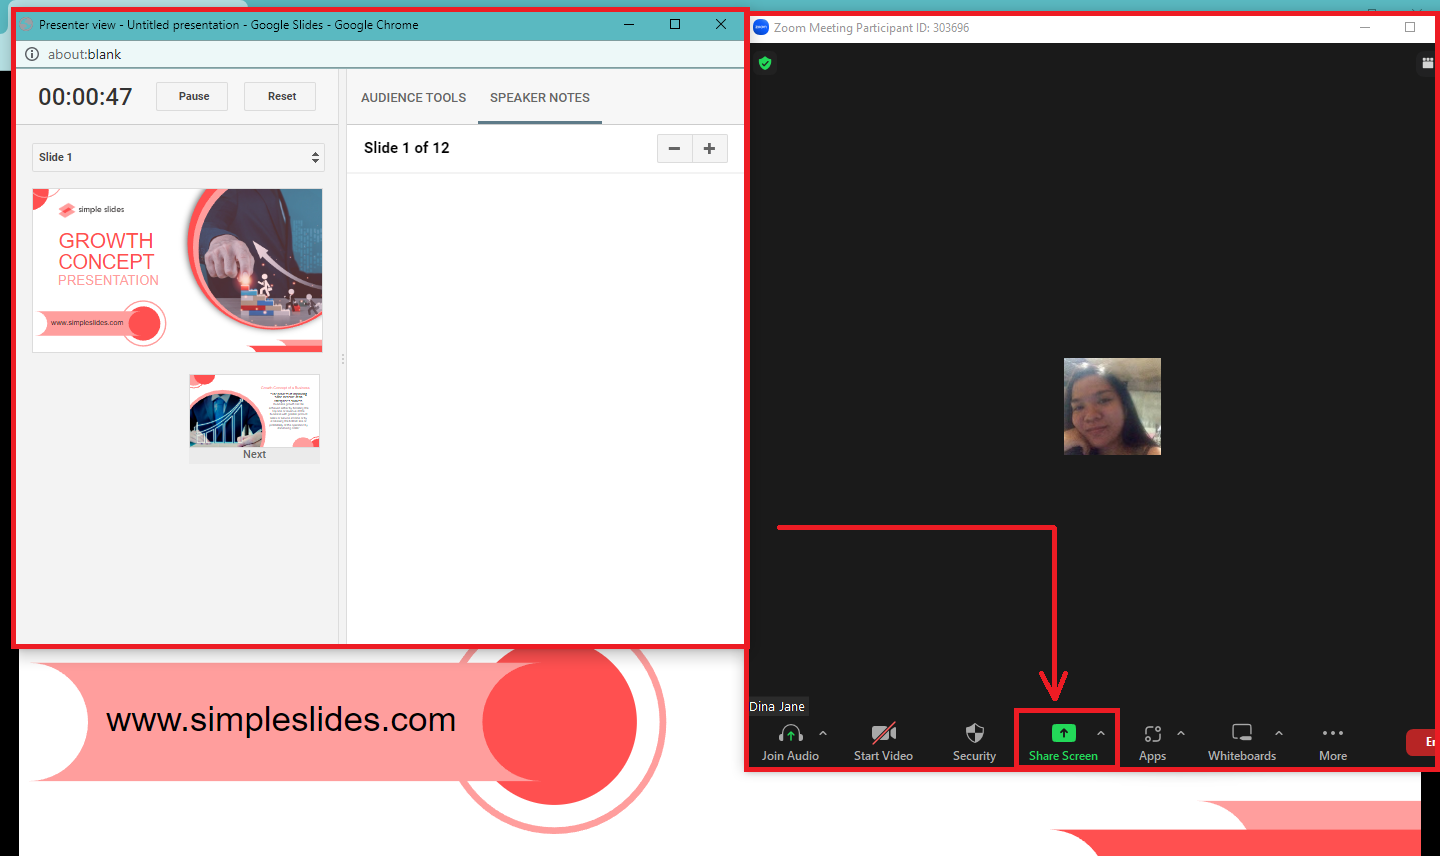 Once you open the Google Slides presenter view, go to your zoom app and click "Share screen."